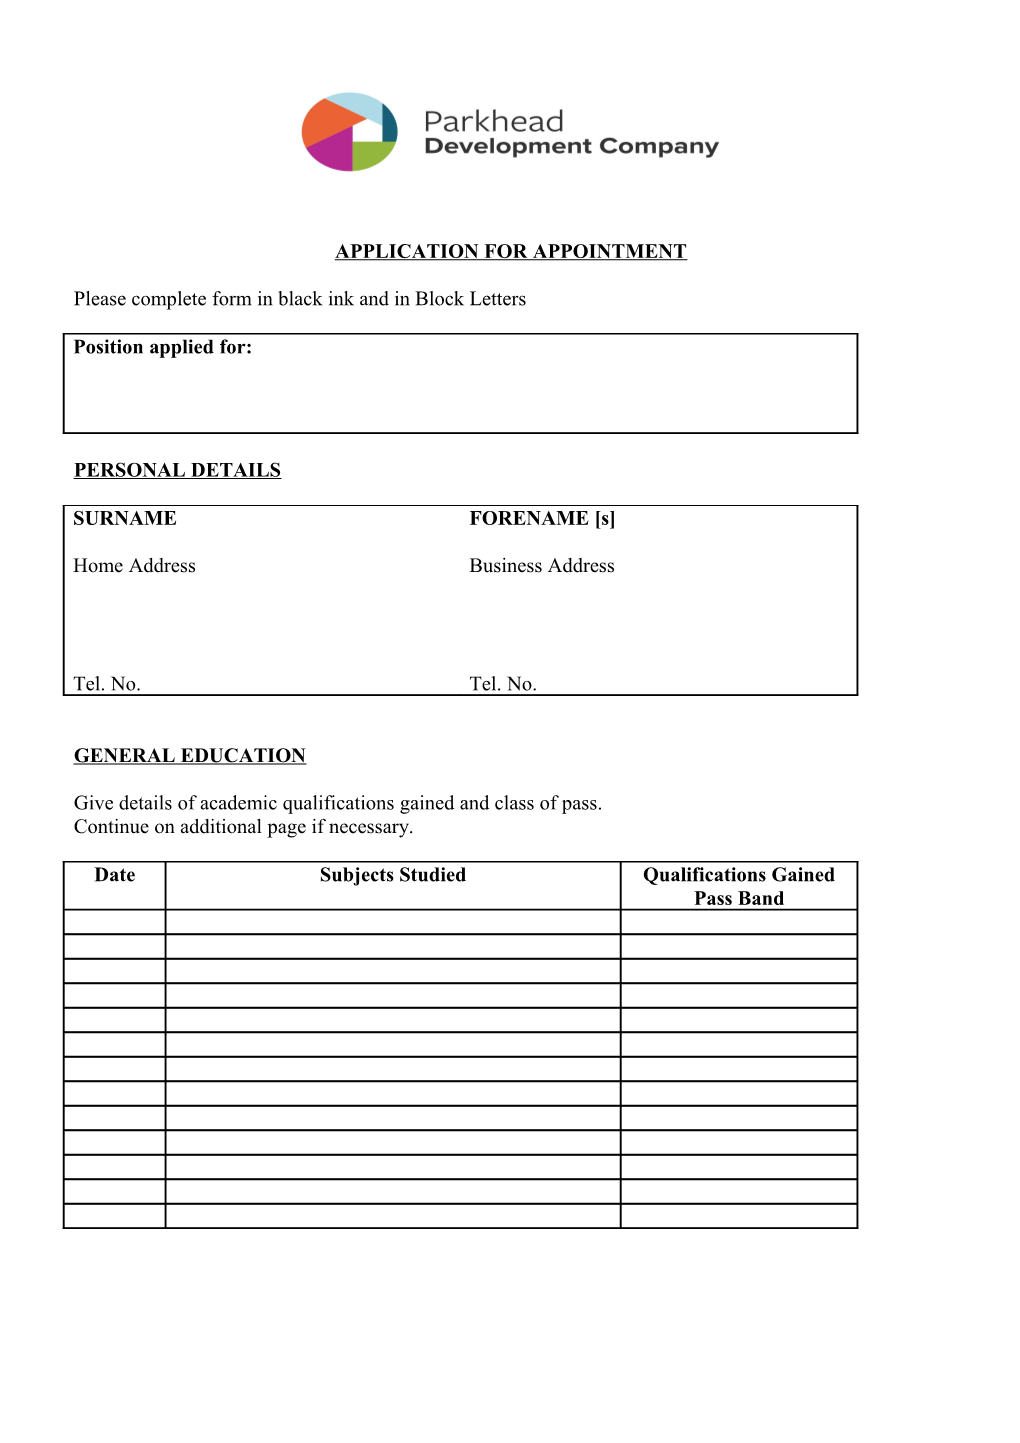 Please Complete Form in Black Ink and in Block Letters